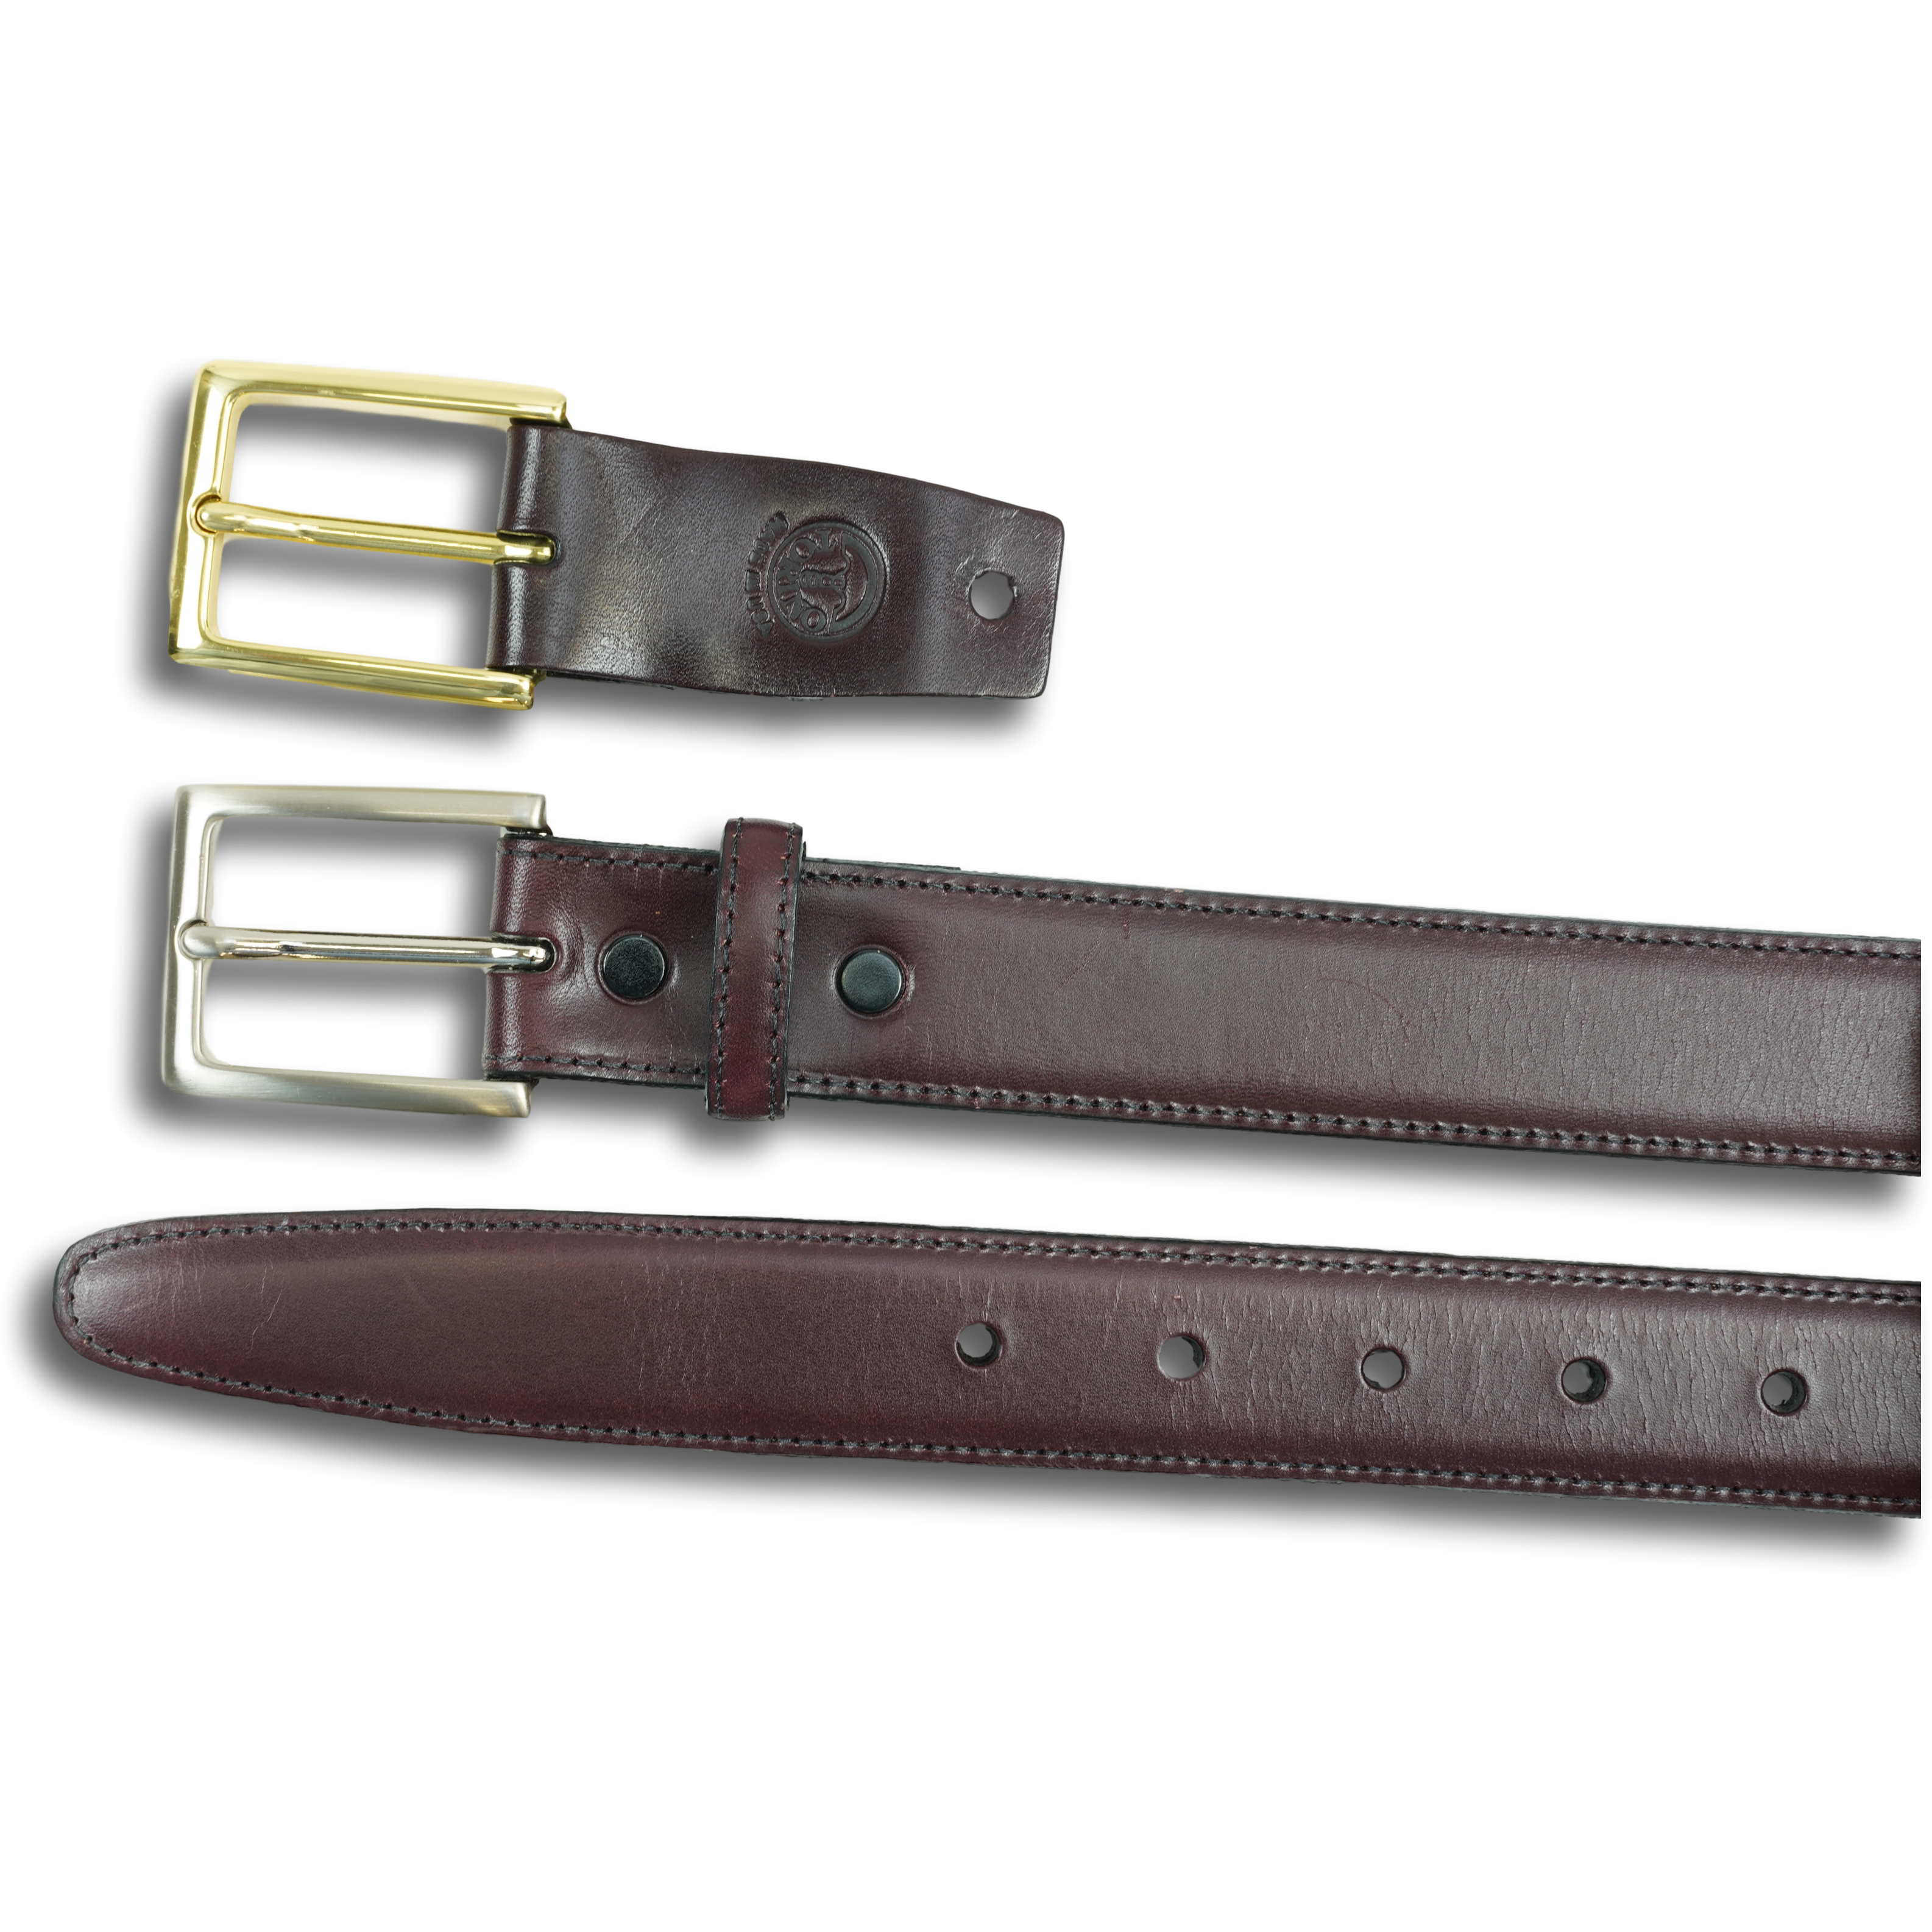 Kipskin Belt with Brass and Nickle Interchangeable Buckles